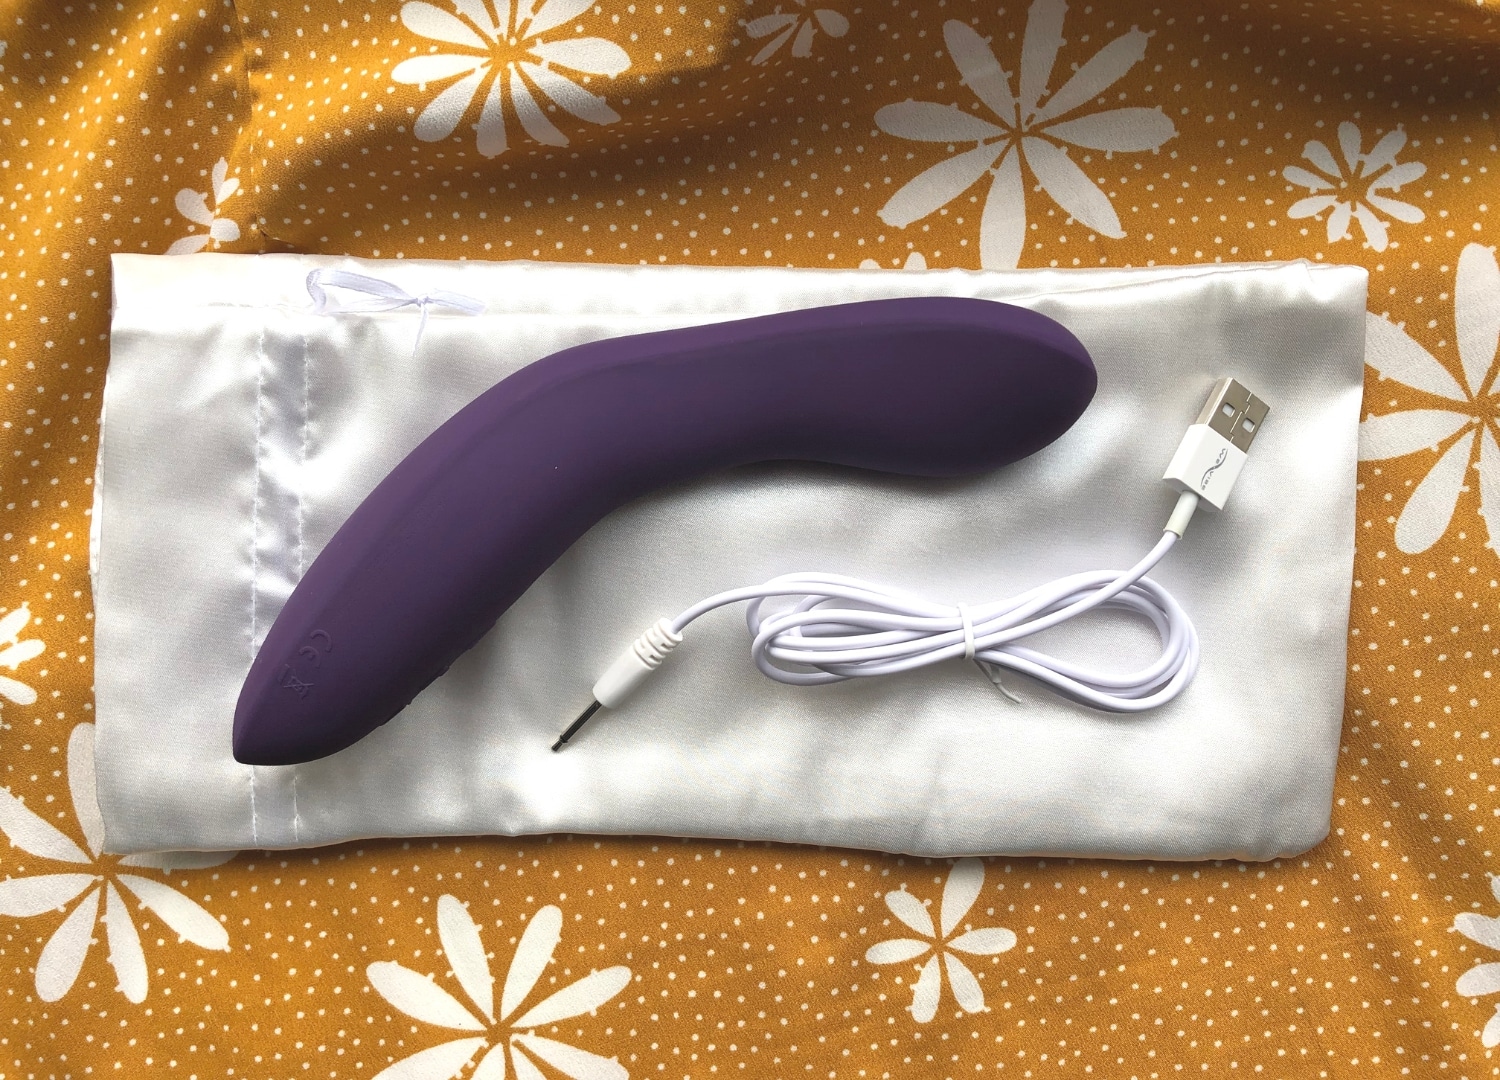 We-Vibe Rave G-Spot Vibrator Materials and care